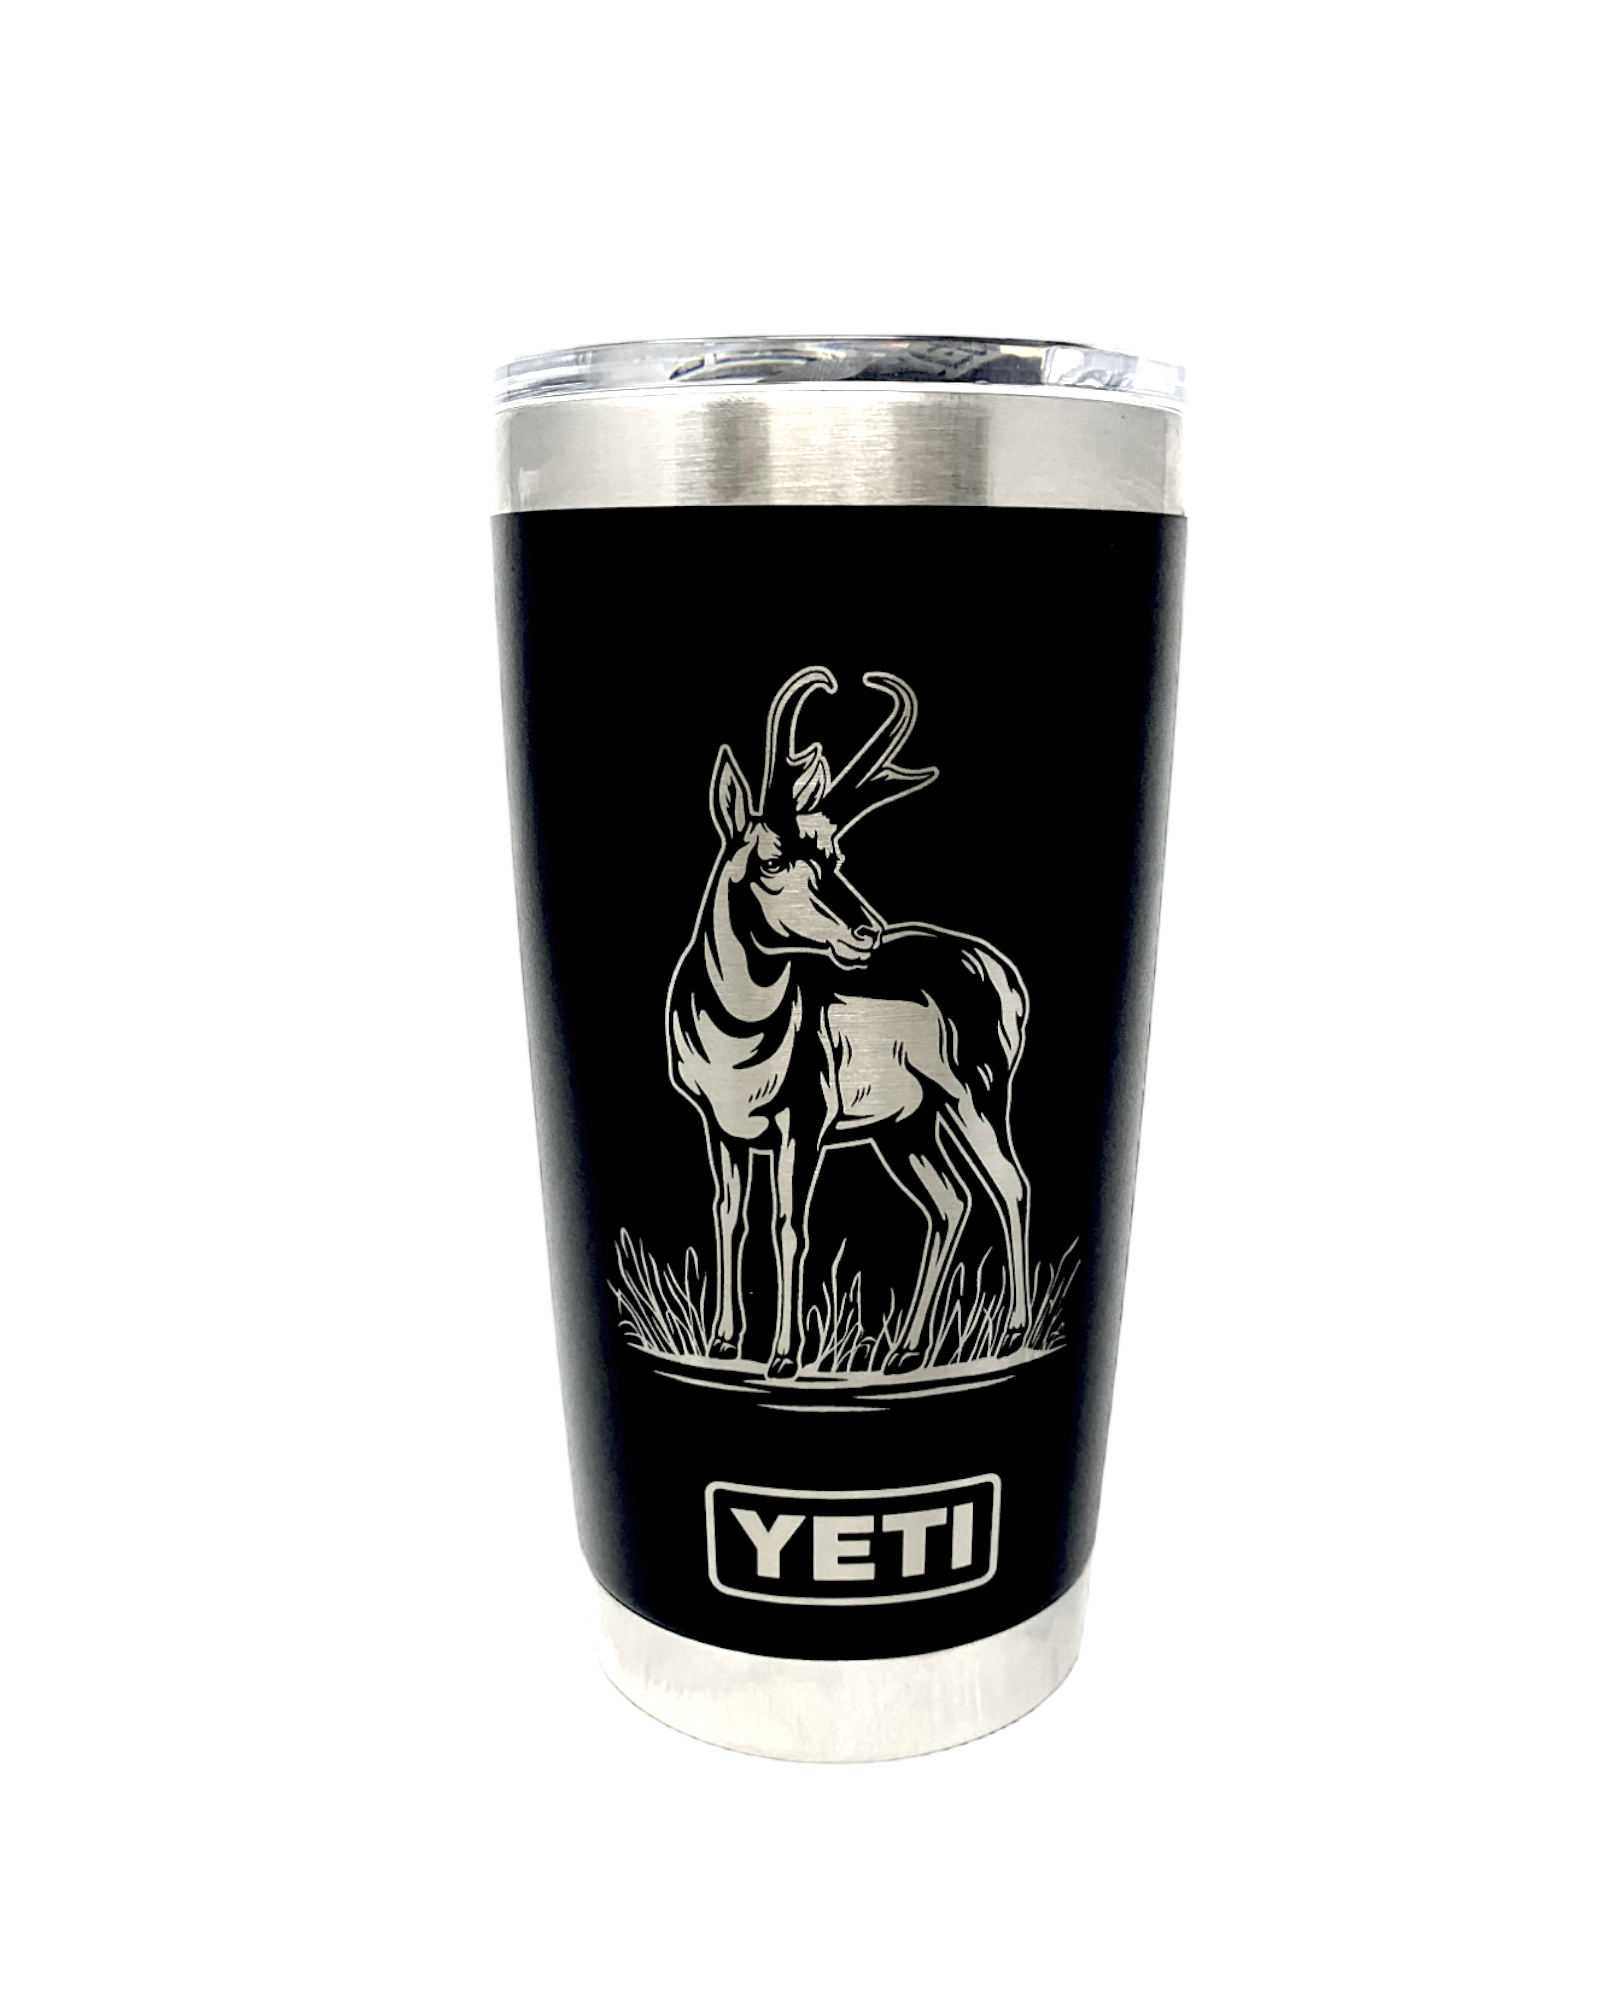 The Pronghorn Antelope Yeti Tumbler gives hunters the ideal outdoor companion.